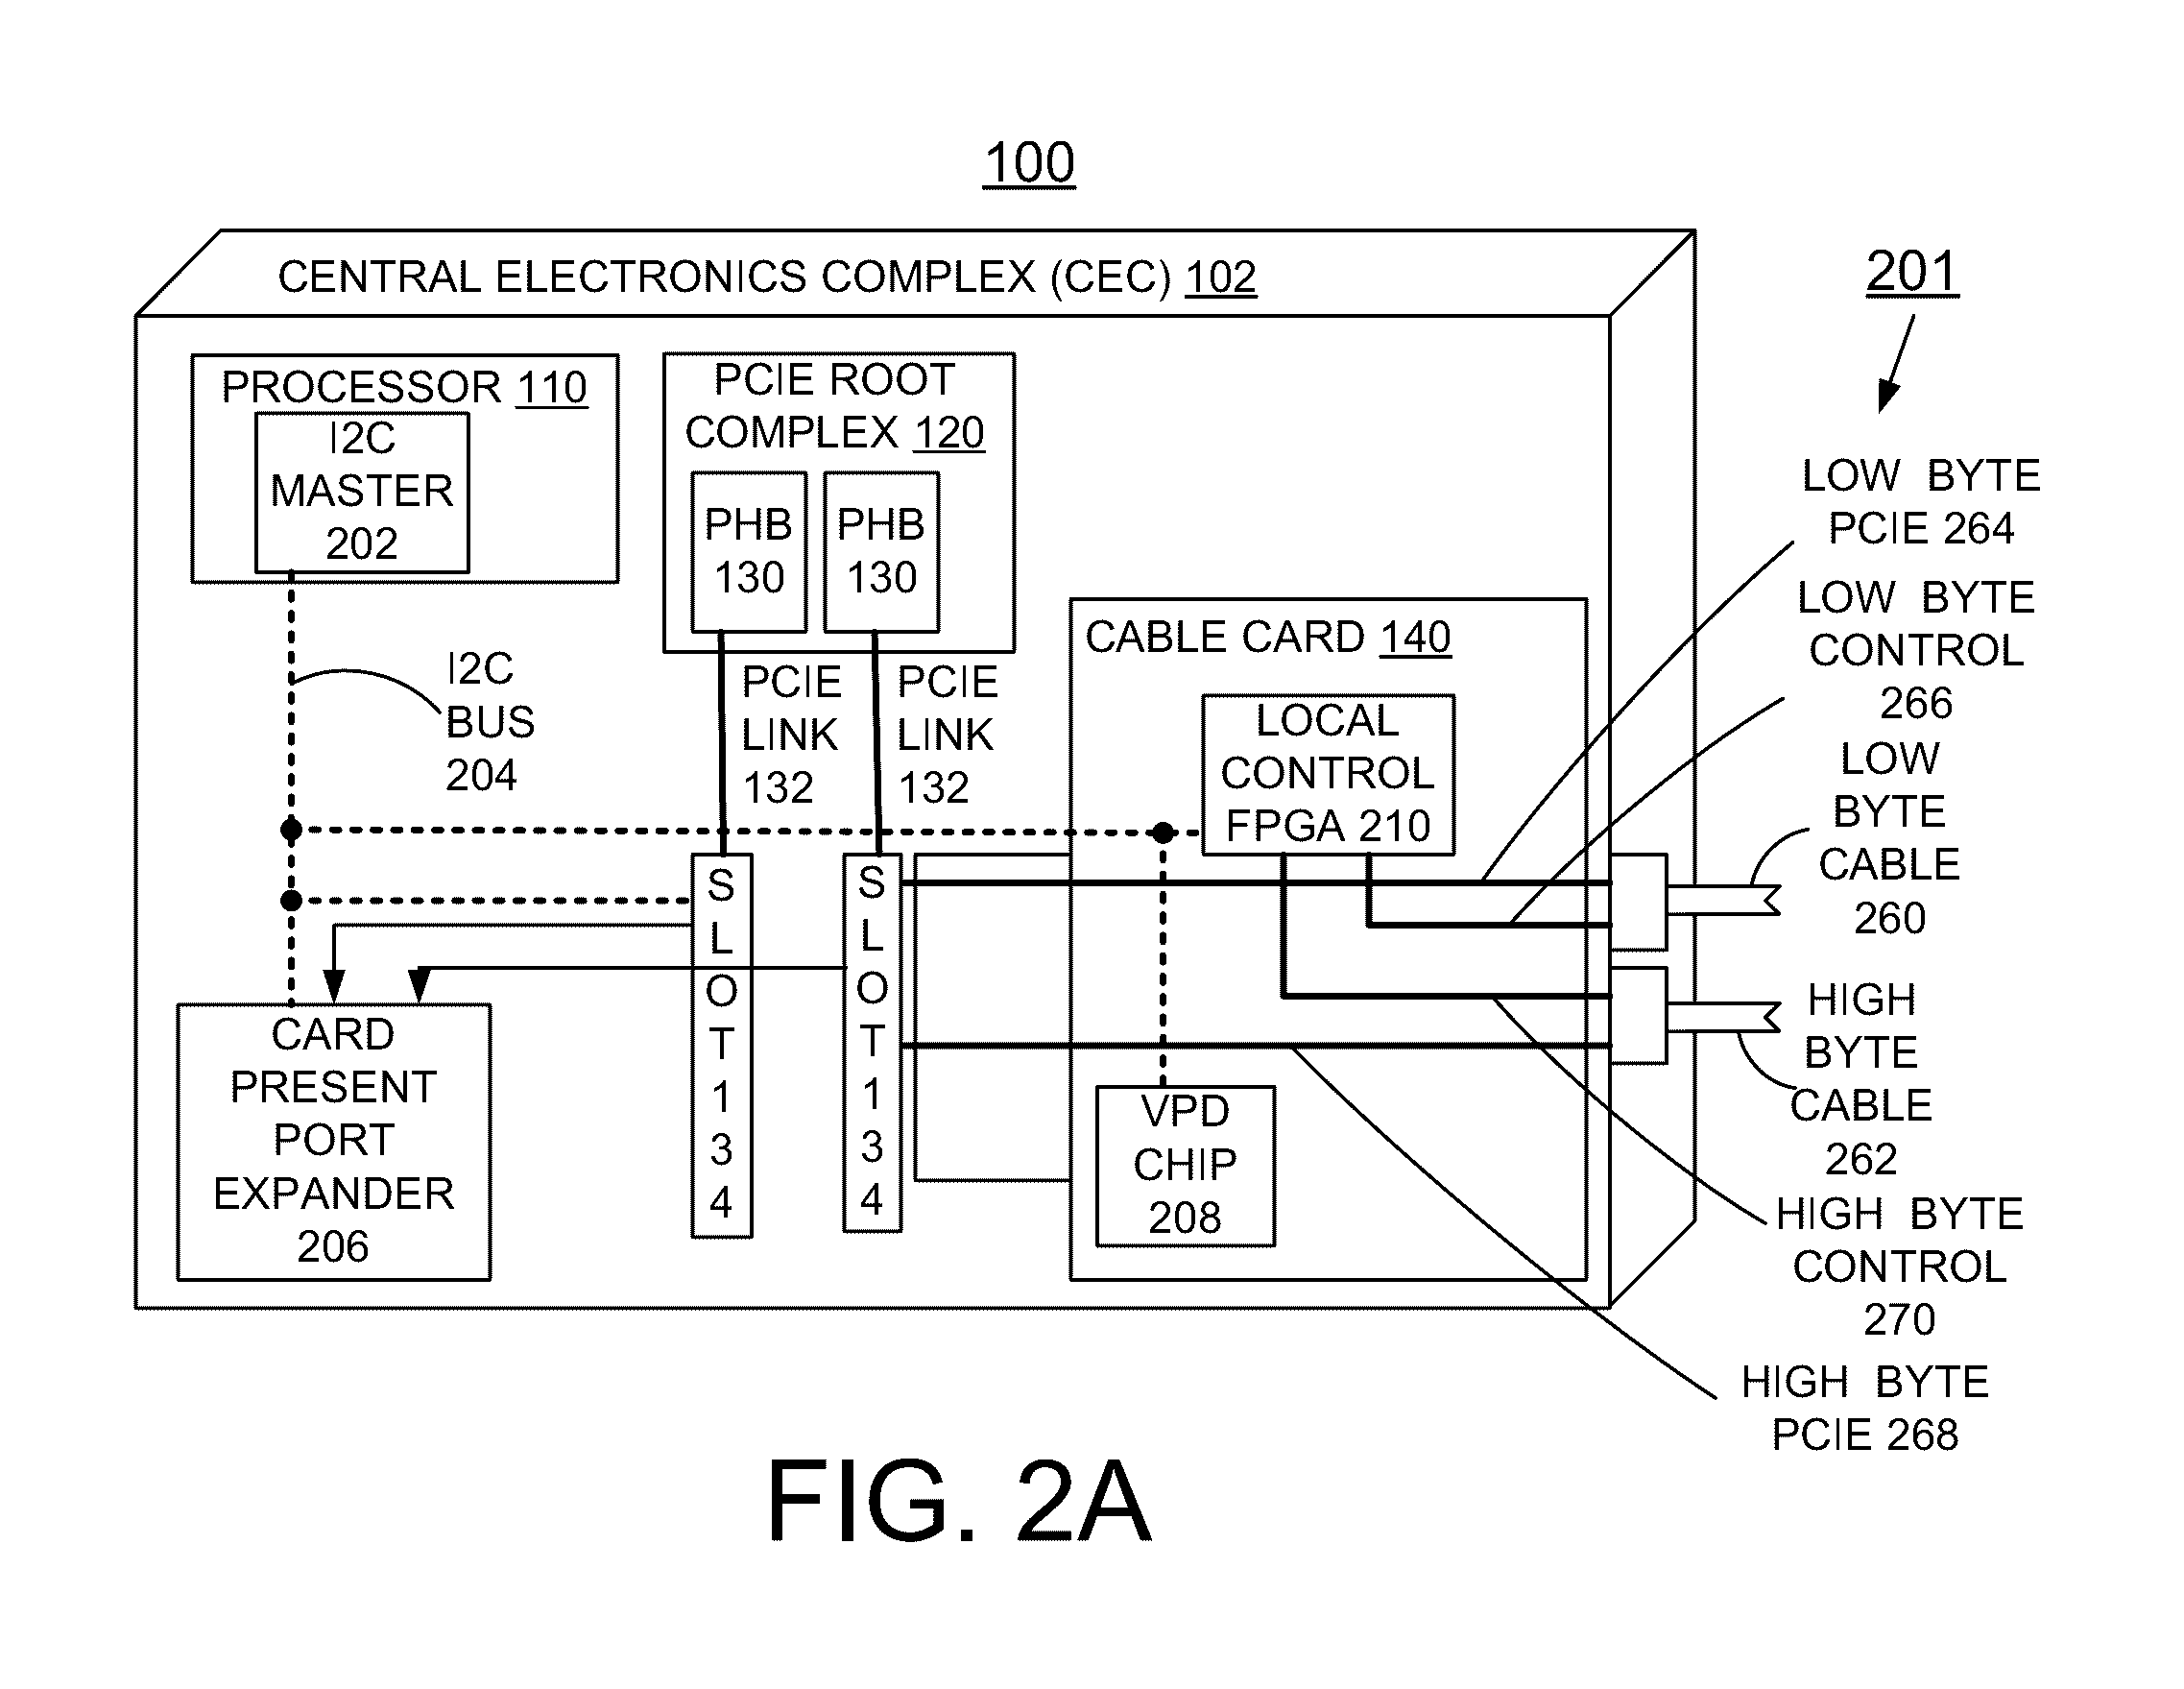 Detecting and sparing of optical PCIE cable channel attached IO drawer